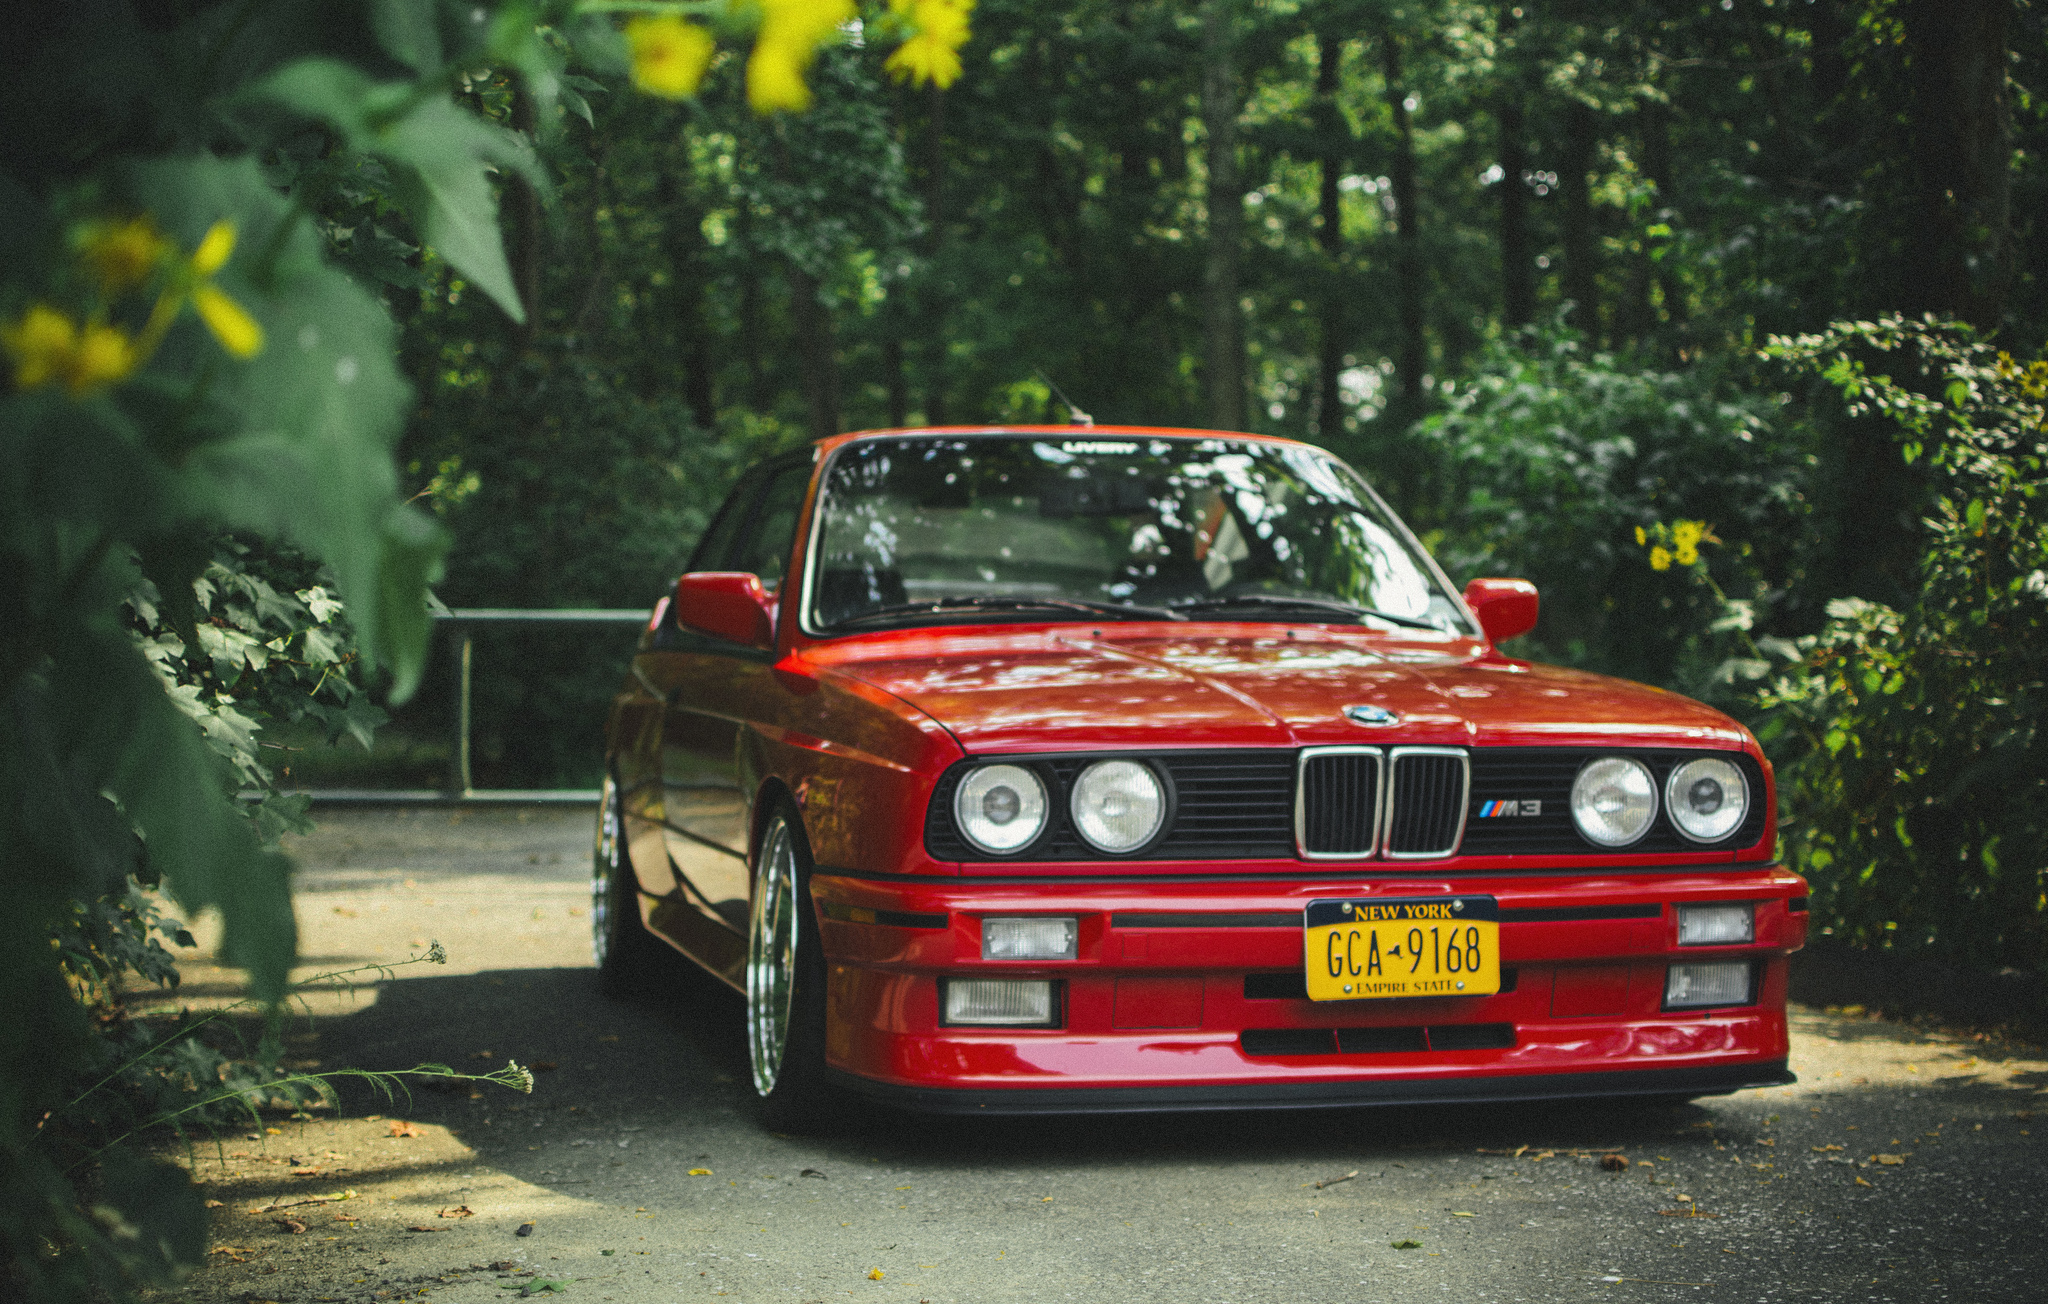 Bmw e30 m3 red tuning bmw m3 red before wallpaper photos